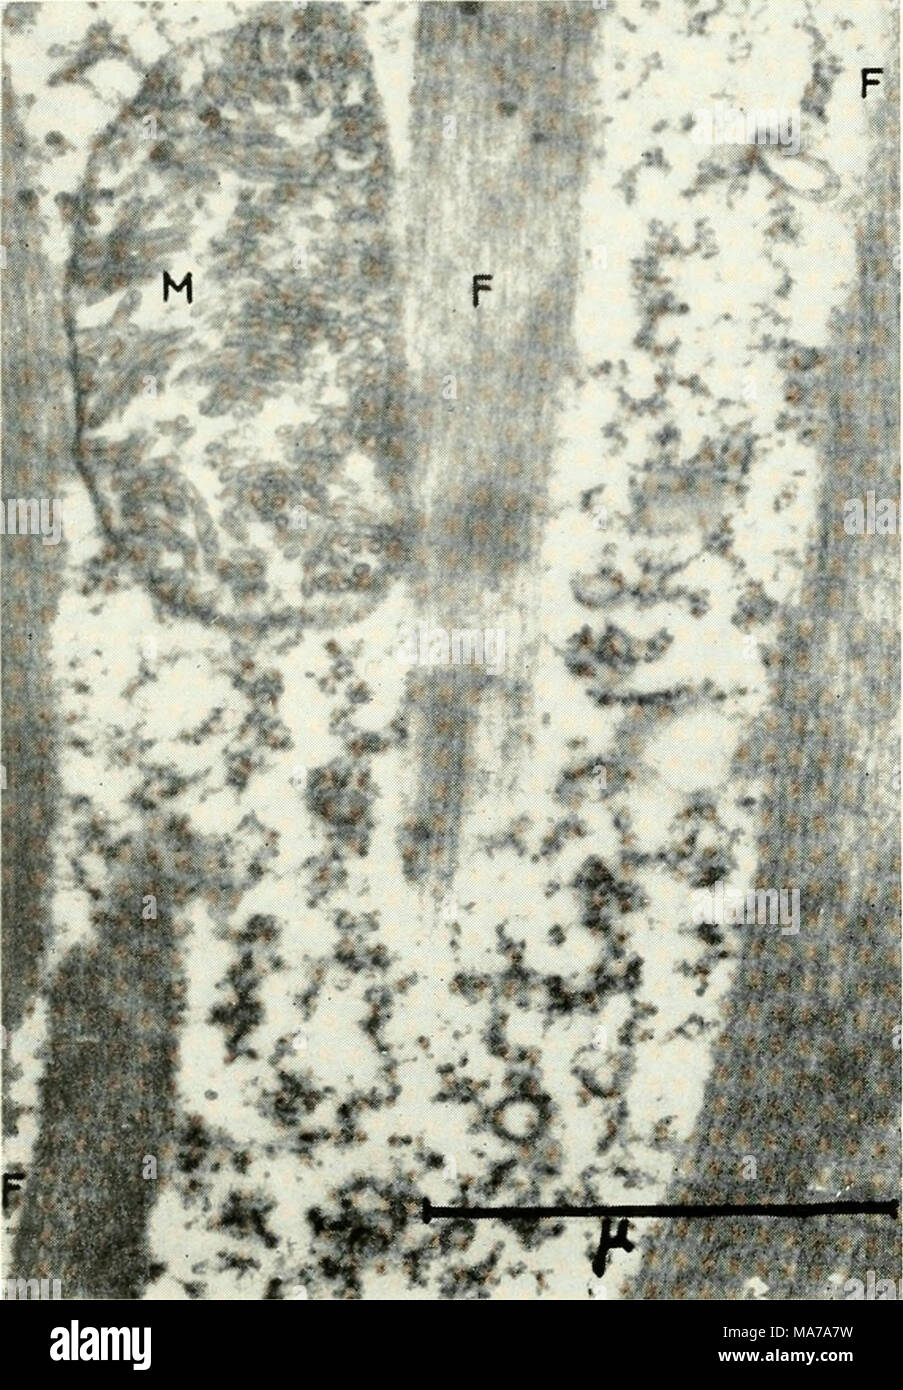 . Electron microscopy; proceedings of the Stockholm Conference, September, 1956 . Fig. 5. Fruntonia marina. Longitudinal section of some plia- ryngeal proteic fibres (F). M, mitochondria. Magnification X 34,000. By their structure and their position, these fibres are readily comparable to those which form the pharyngeal basket of Nassula. This fact should be remembered if one wishes to study the comparative morphology and evolution of the Ciliates. We have elsewhere described similar fibres found around the buccal infundibulum of the peritrichous Ciliates (5). From the cytological point of vie Stock Photo